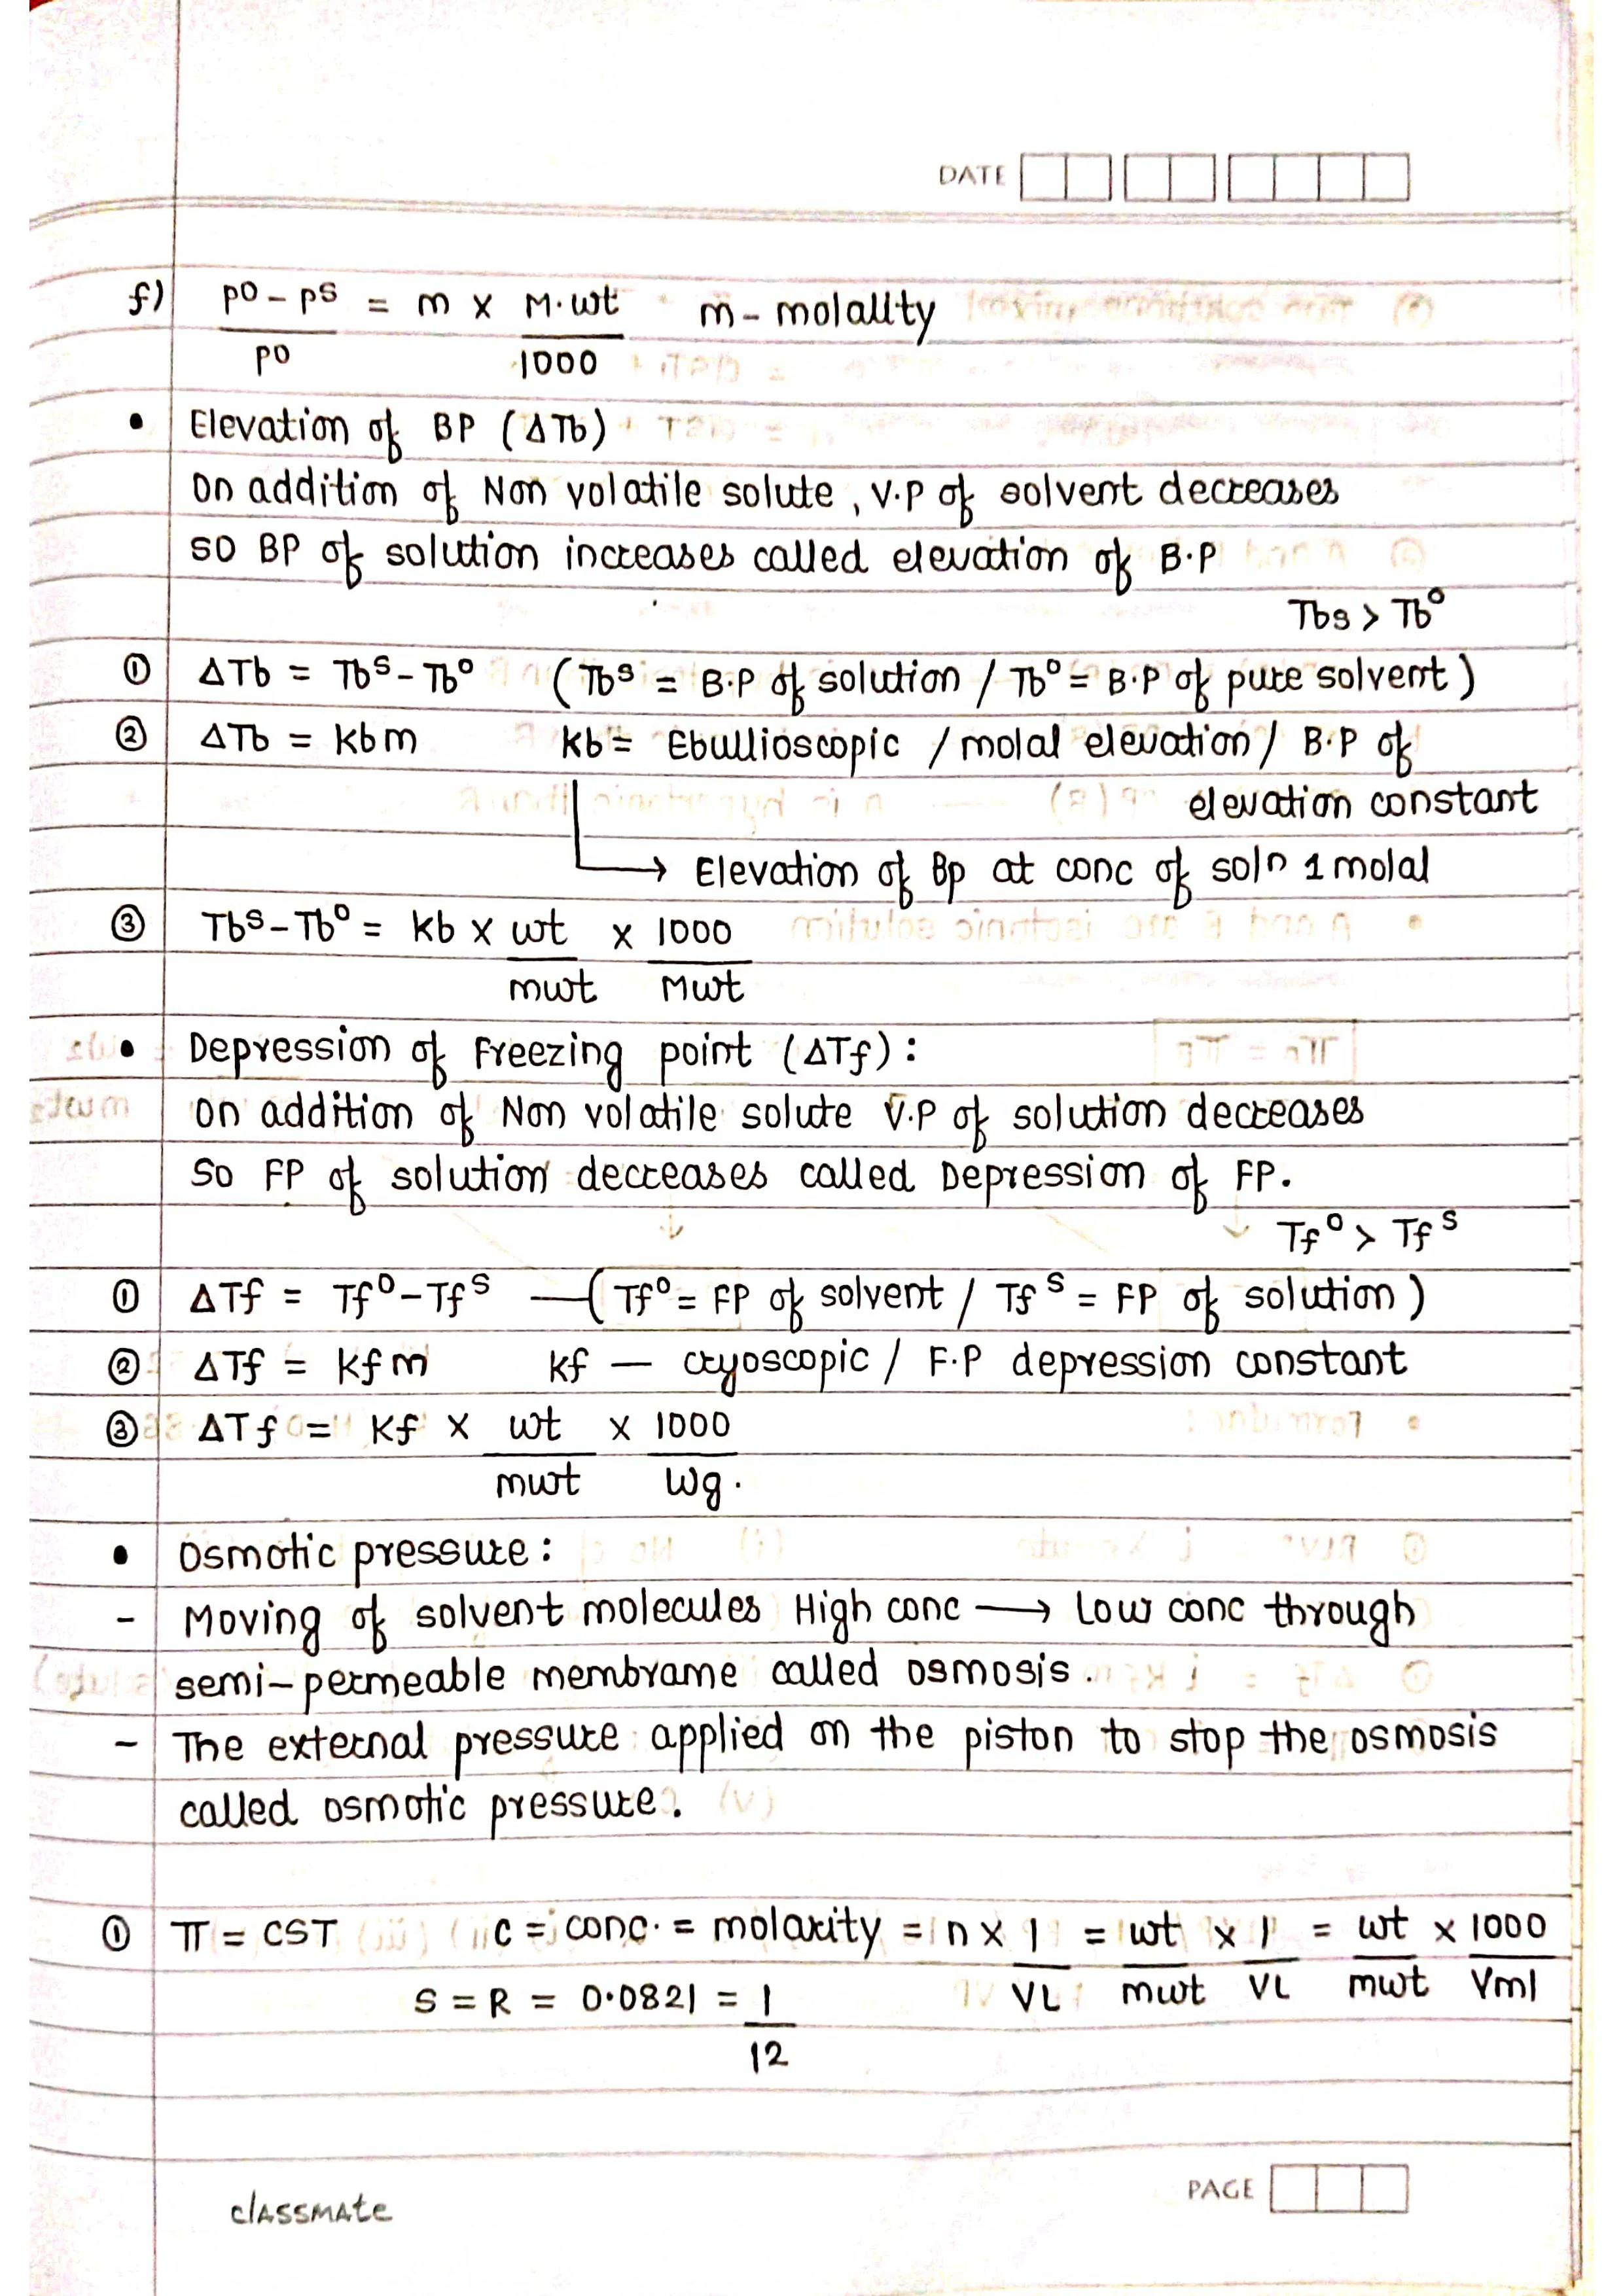 Solutions - Chemistry Short Notes 📚